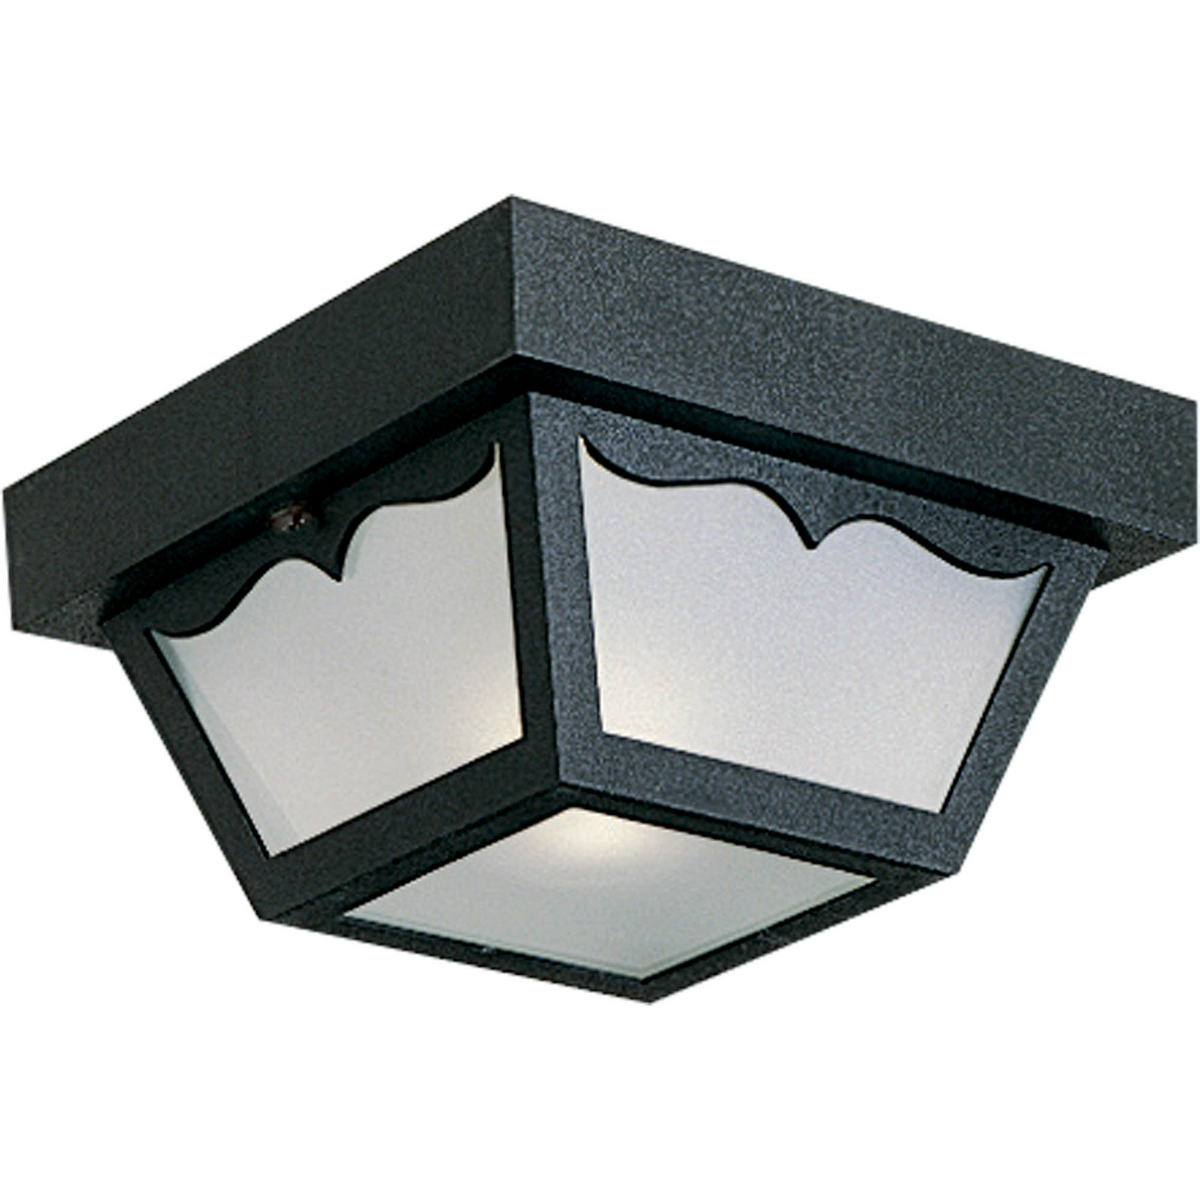 One-light non-metallic ceiling light with one-piece white acrylic diffuser and scalloped detail. Black finish.